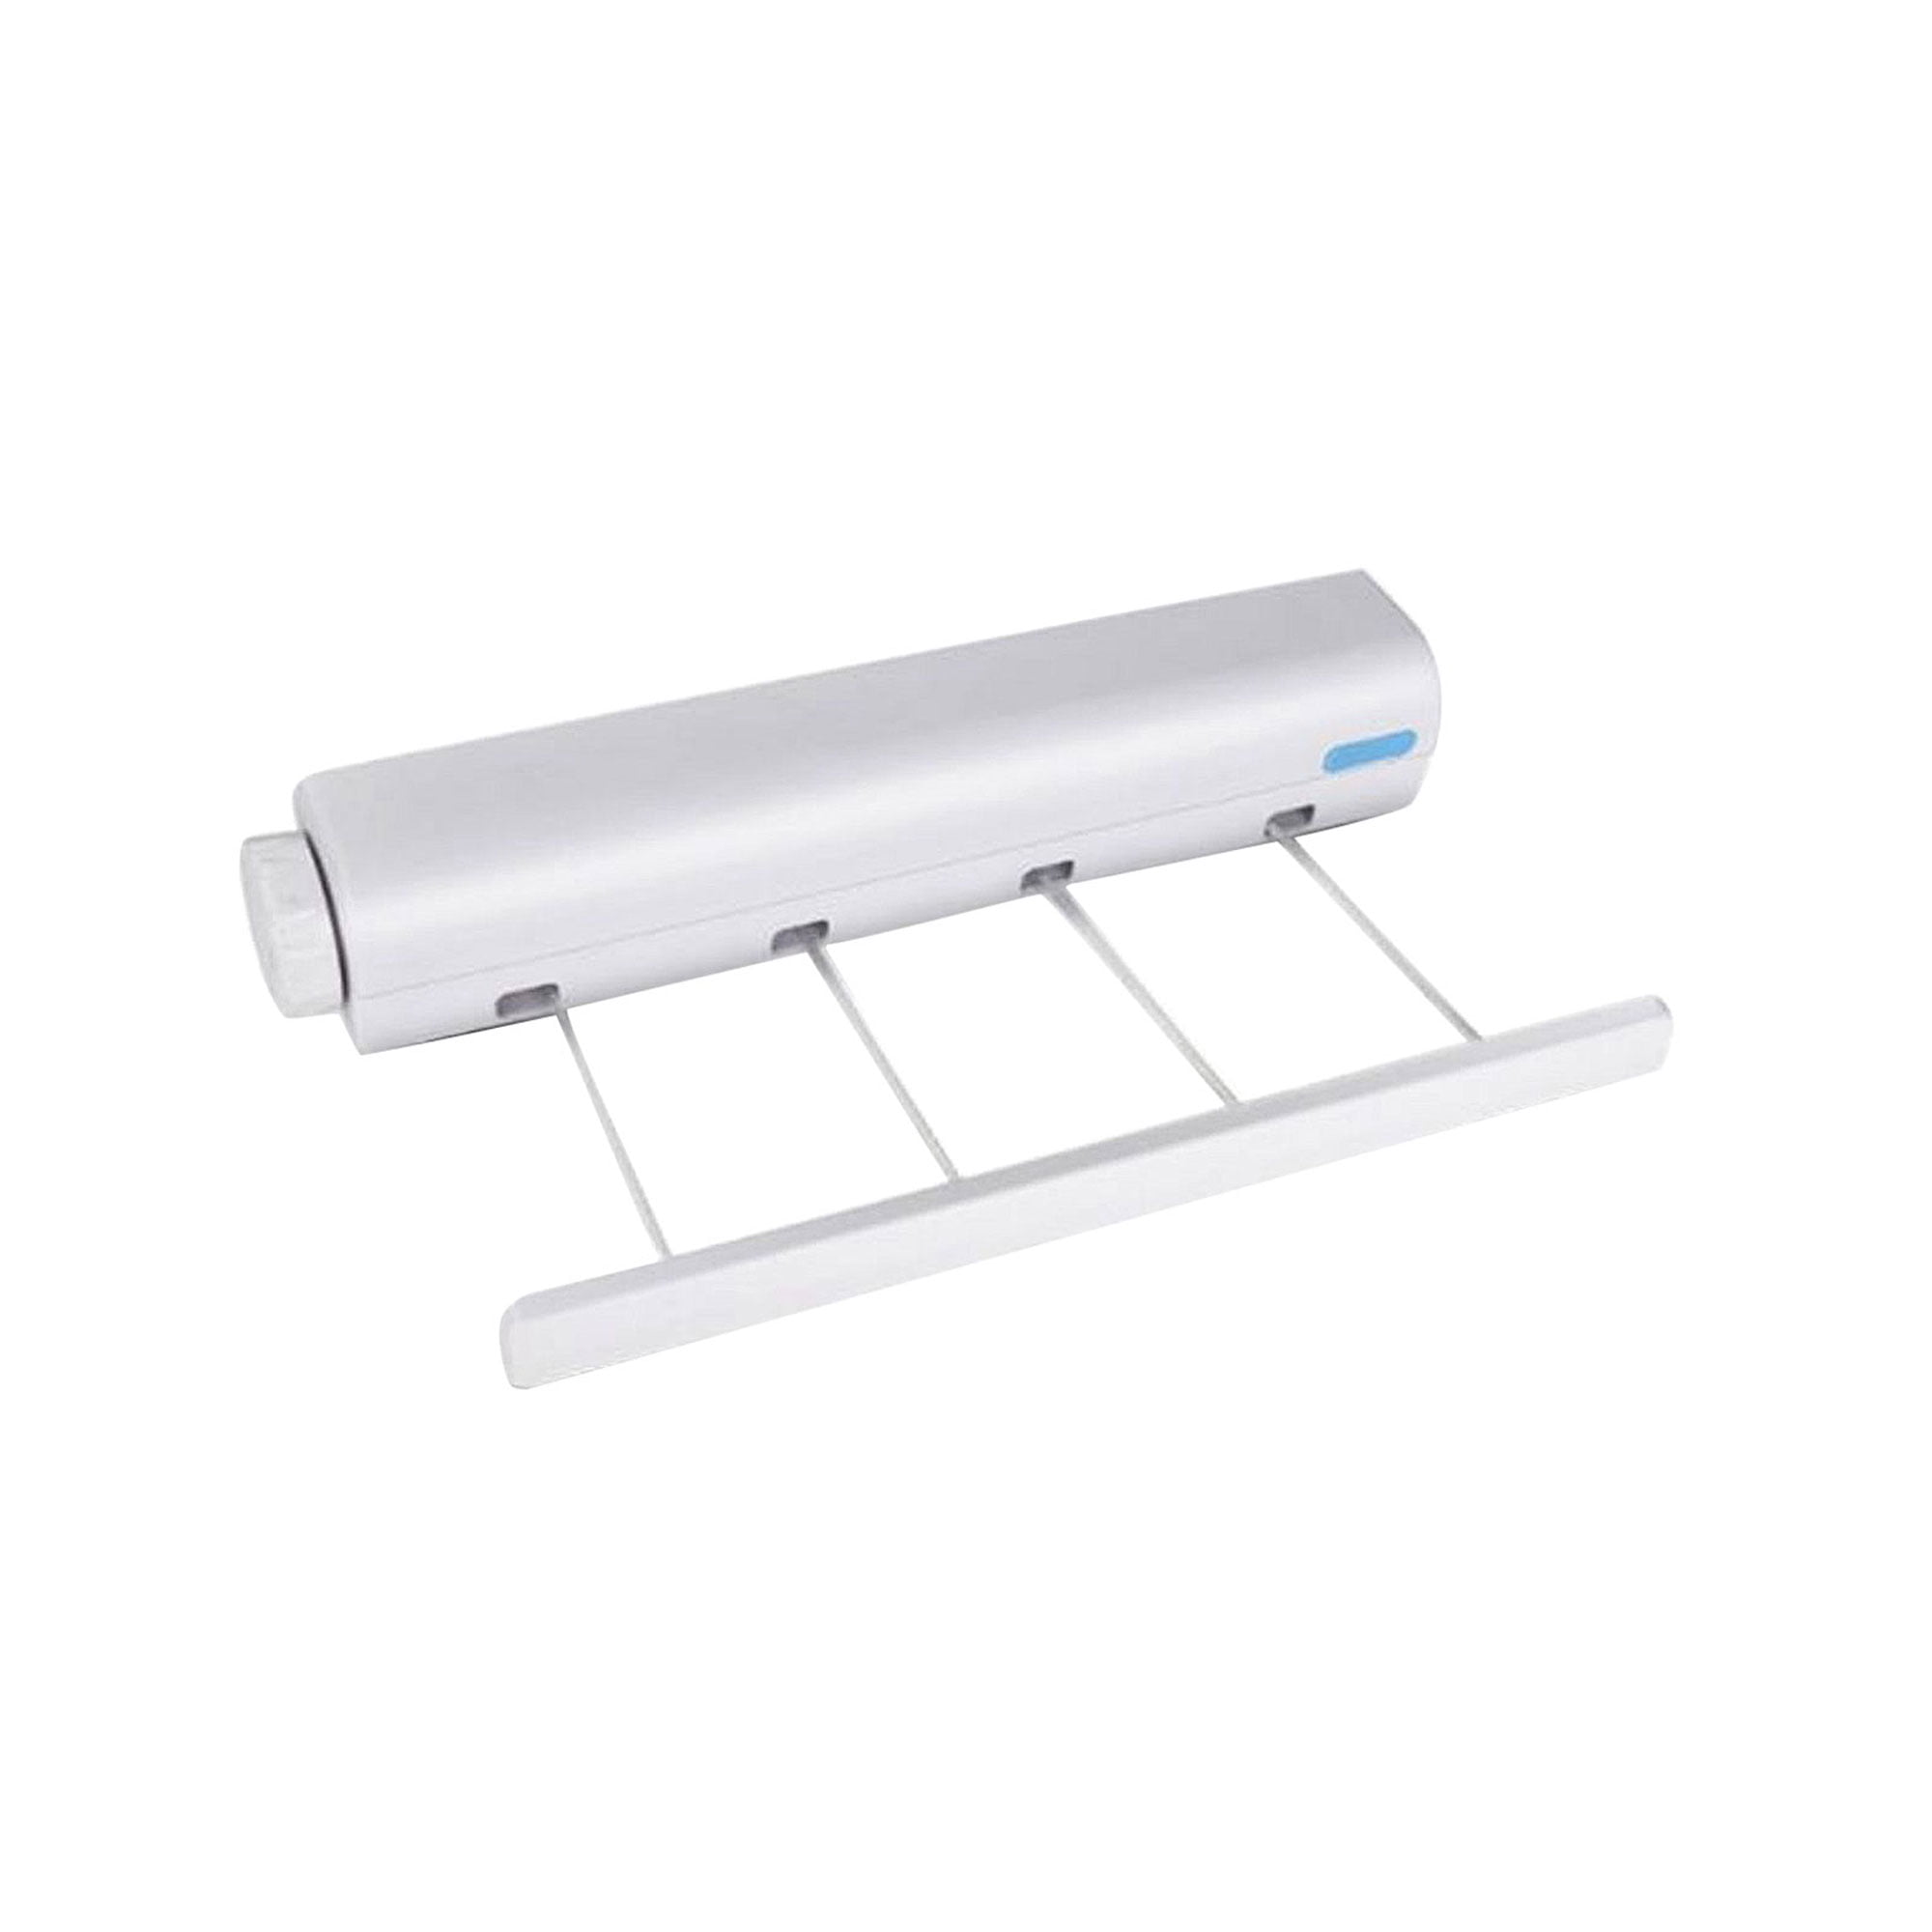 3.75M Retractable Hanging Rack 5Line Wall Mounted White for Laundry Dry Clothes. 